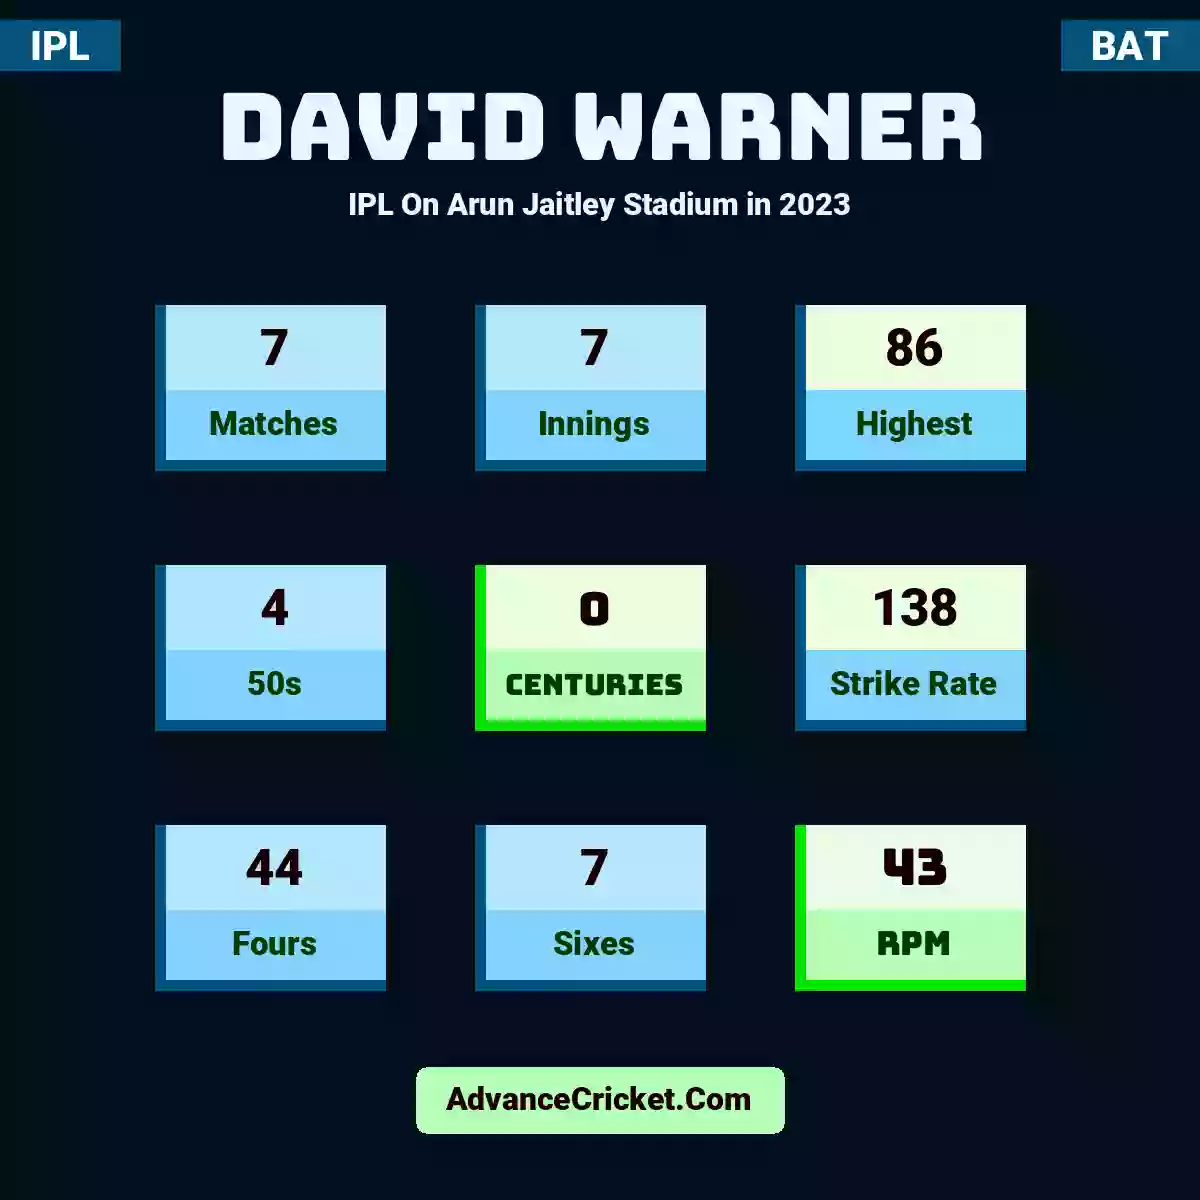 David Warner IPL  On Arun Jaitley Stadium in 2023, David Warner played 7 matches, scored 86 runs as highest, 4 half-centuries, and 0 centuries, with a strike rate of 138. D.Warner hit 44 fours and 7 sixes, with an RPM of 43.